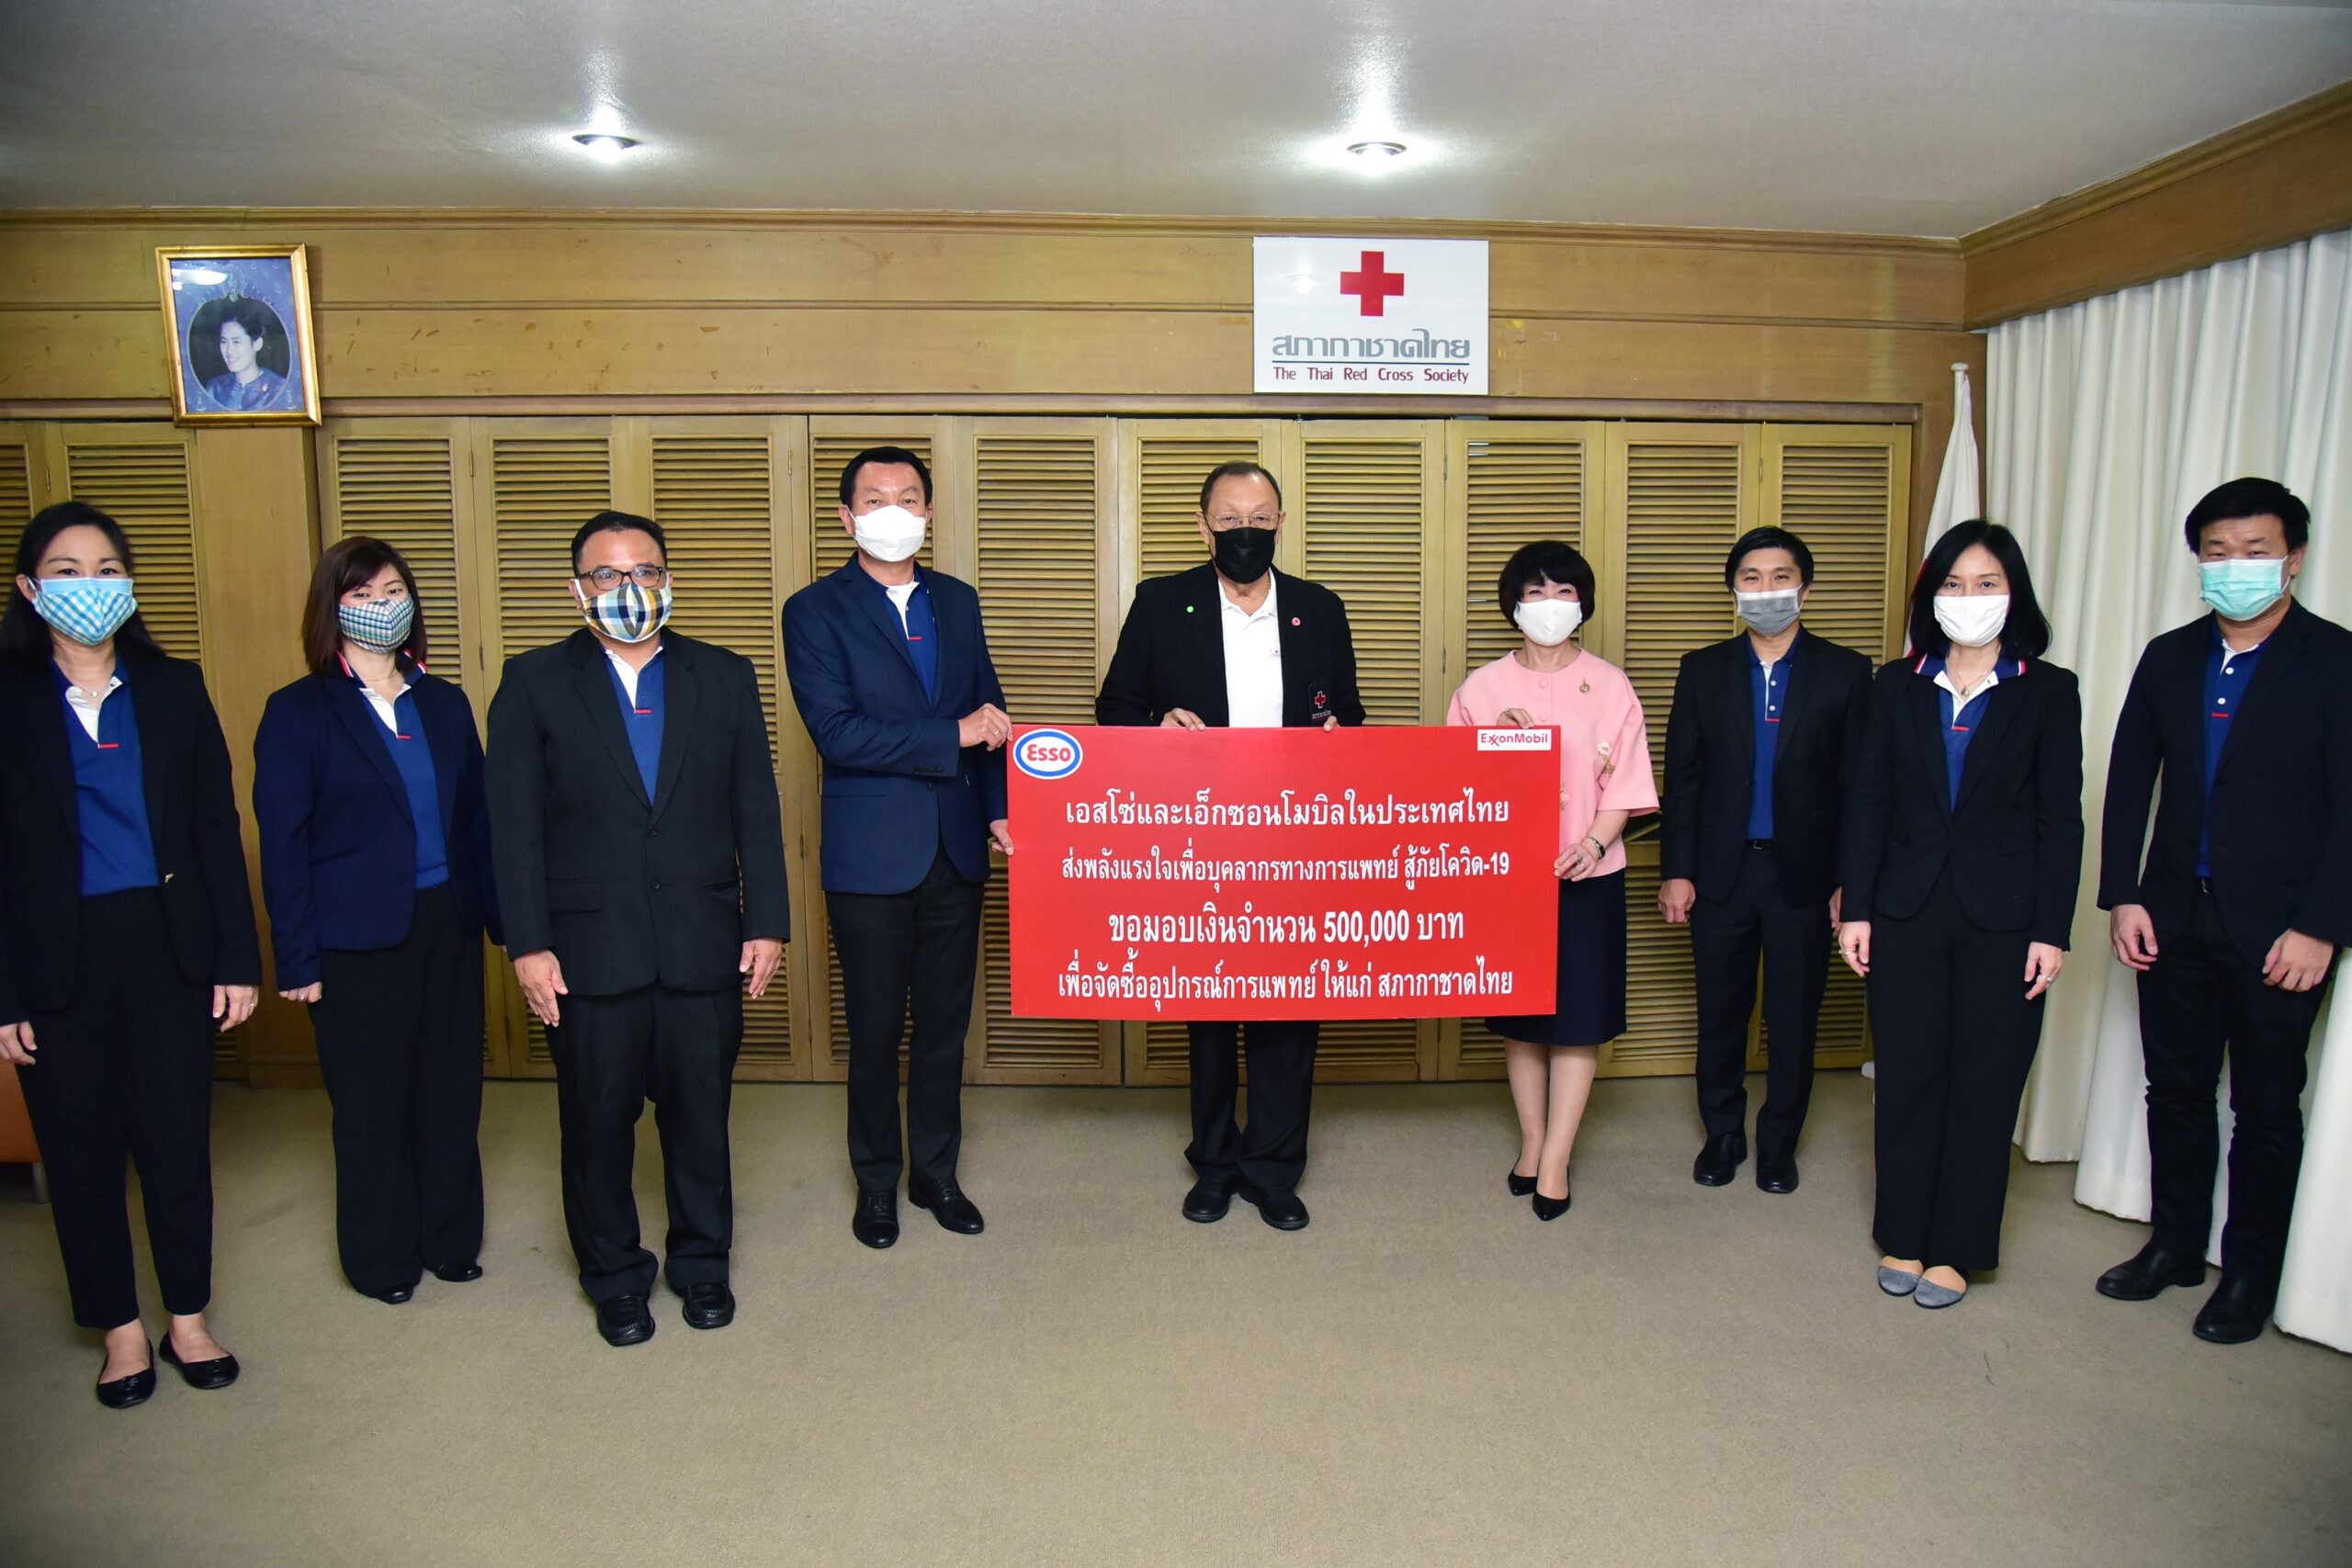 Employees, Customers of Esso and ExxonMobil in Thailand Make Donation 500,000 Baht Contributed to Thai Red Cross to Fight COVID-19